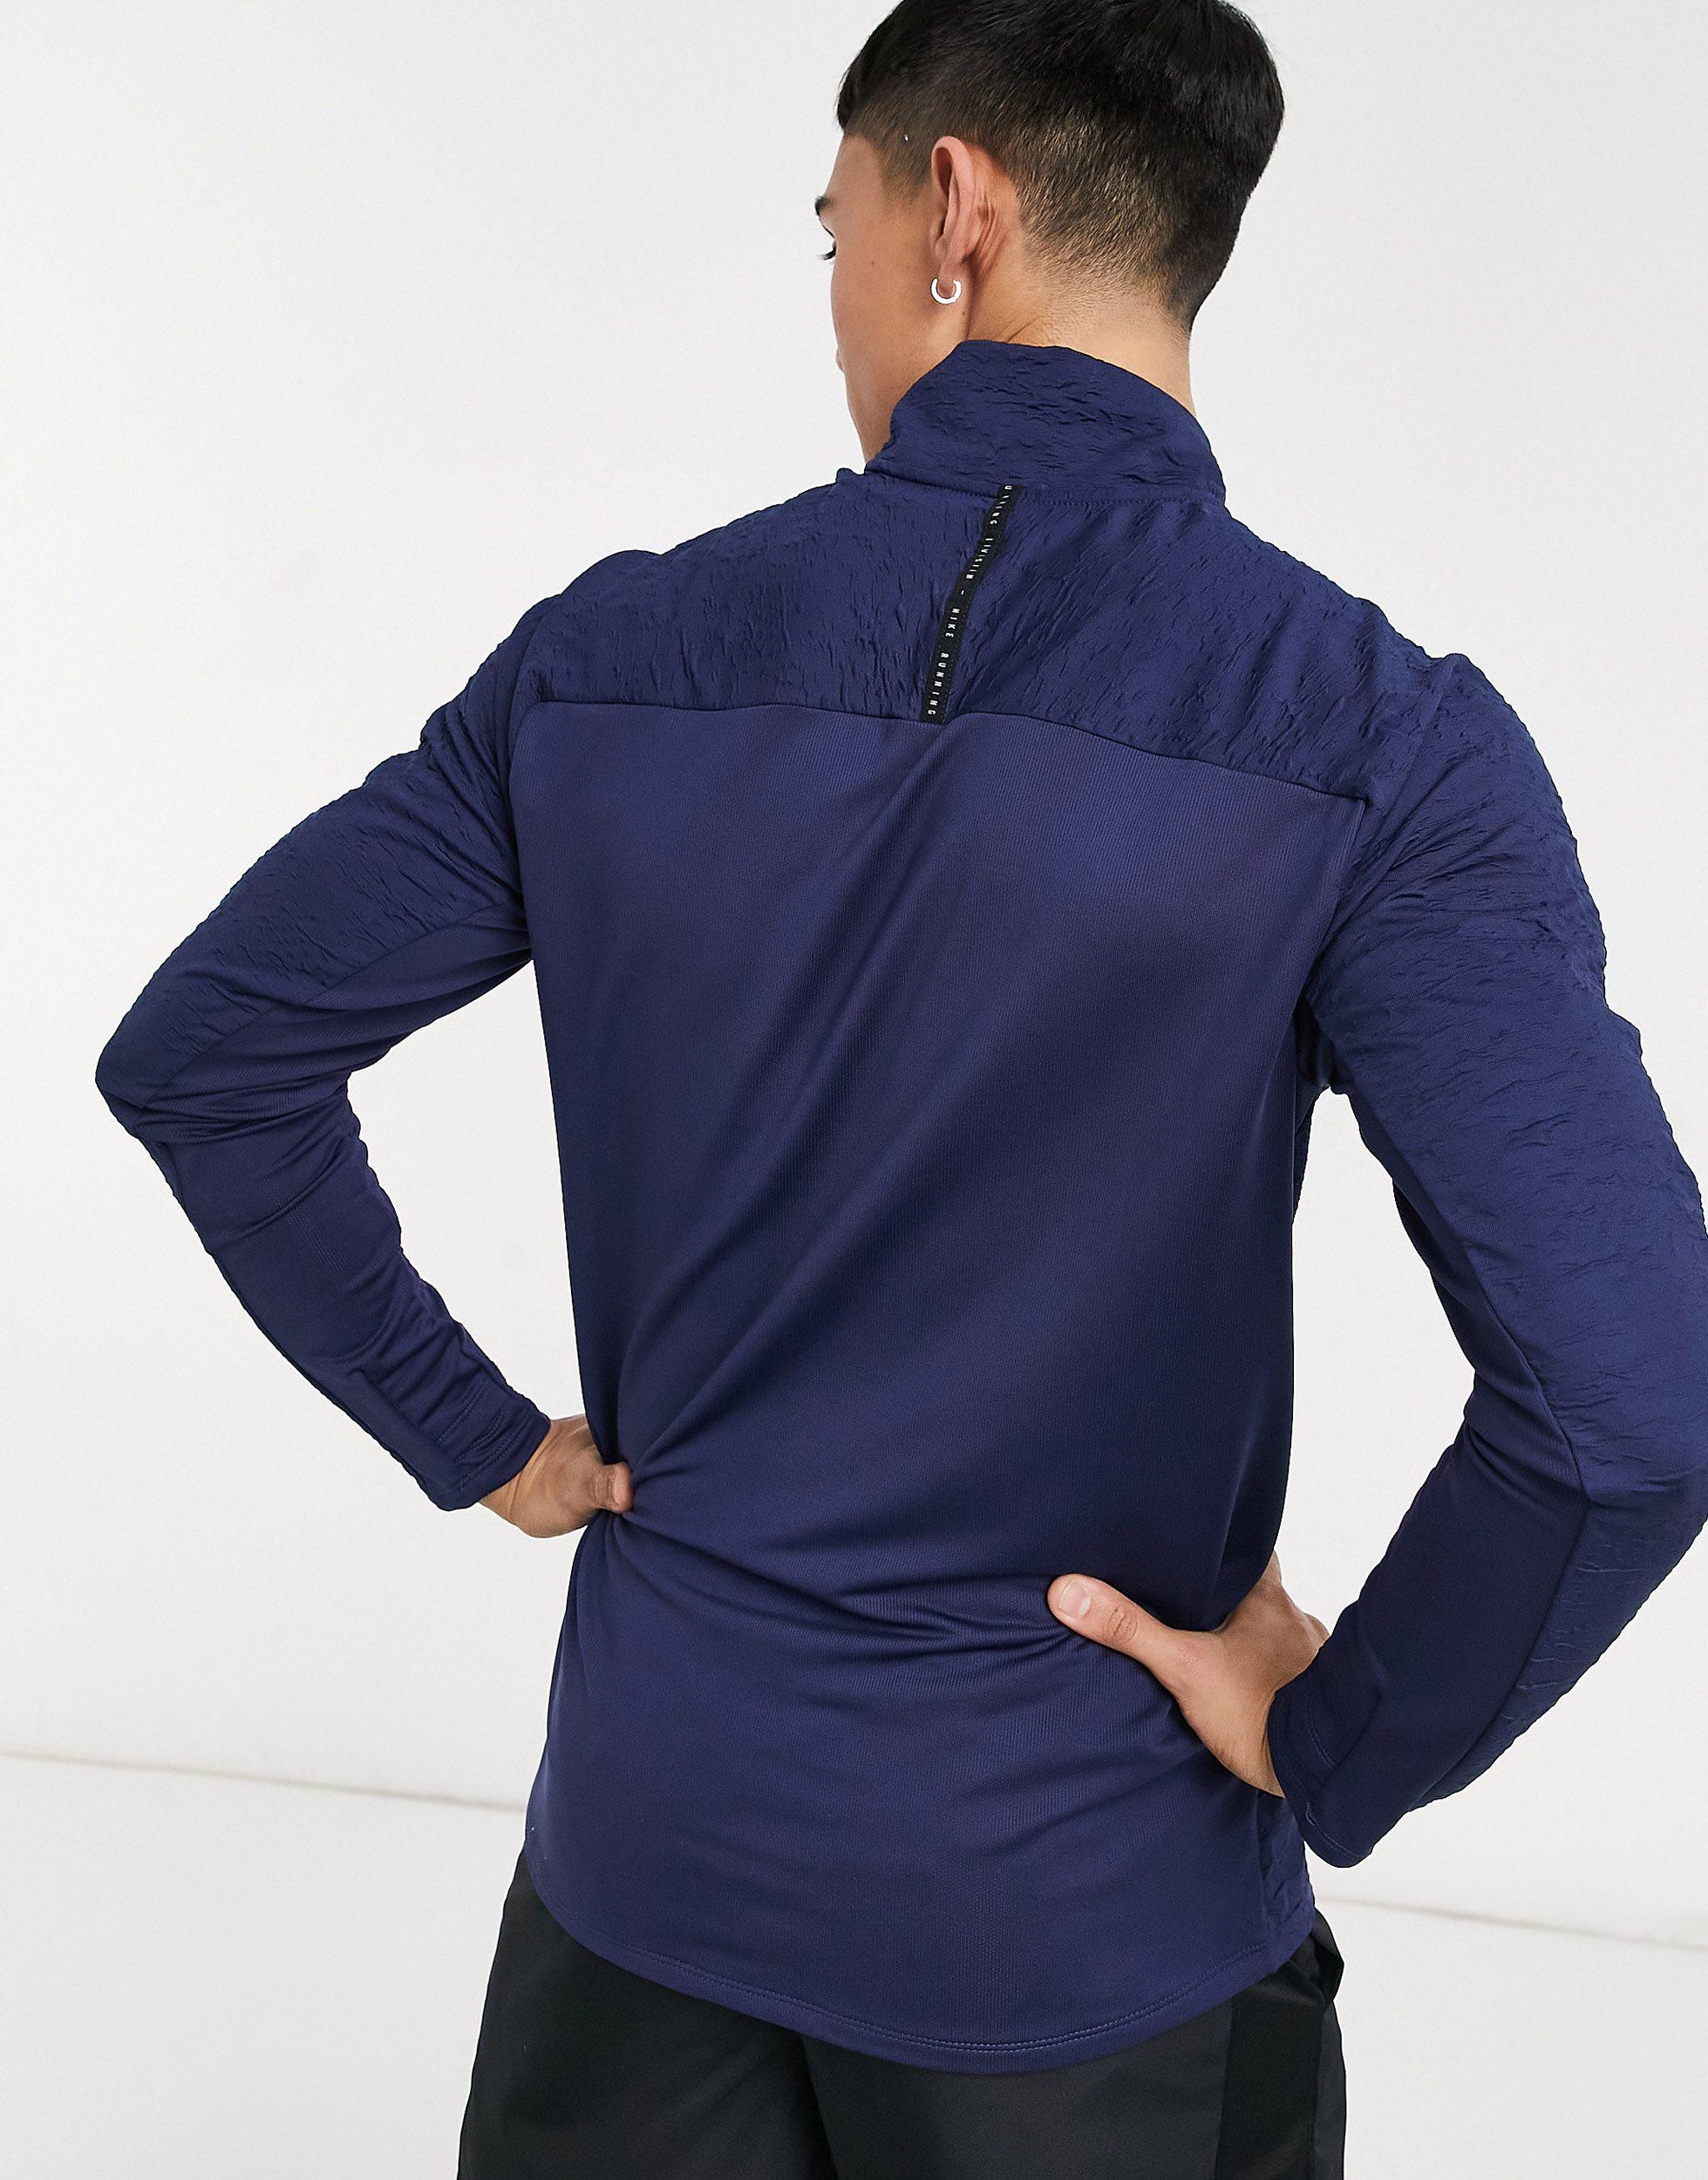 Nike Run Division Element 1/4 Zip Top in Navy (Blue) for Men | Lyst Canada